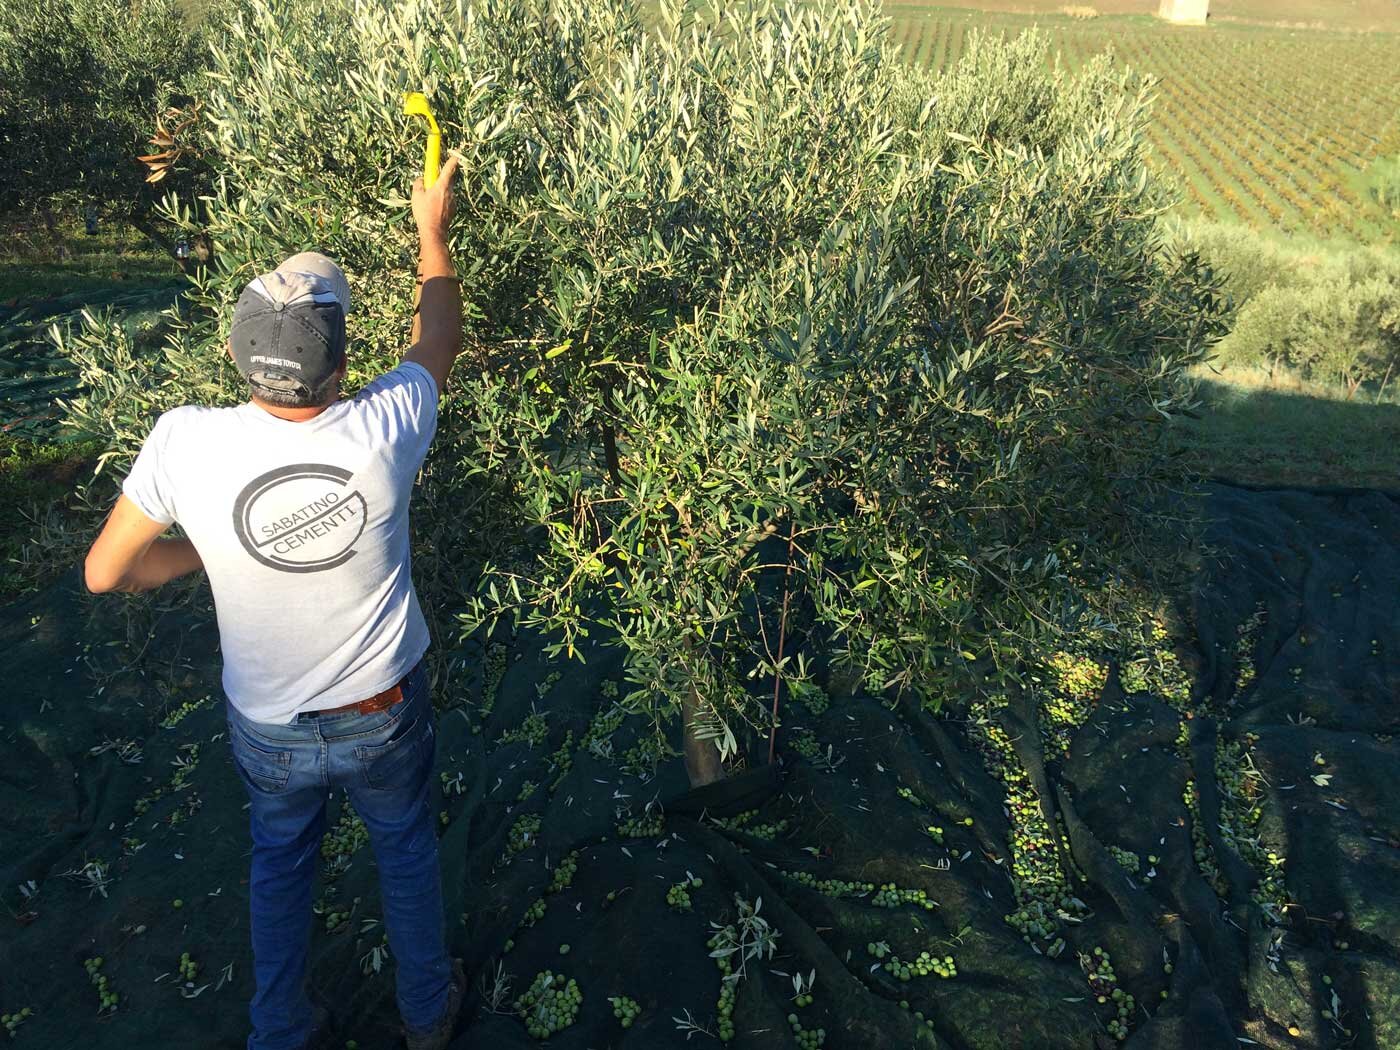 harvest olives Olive trees and olives Cerasuola sicily italy elios